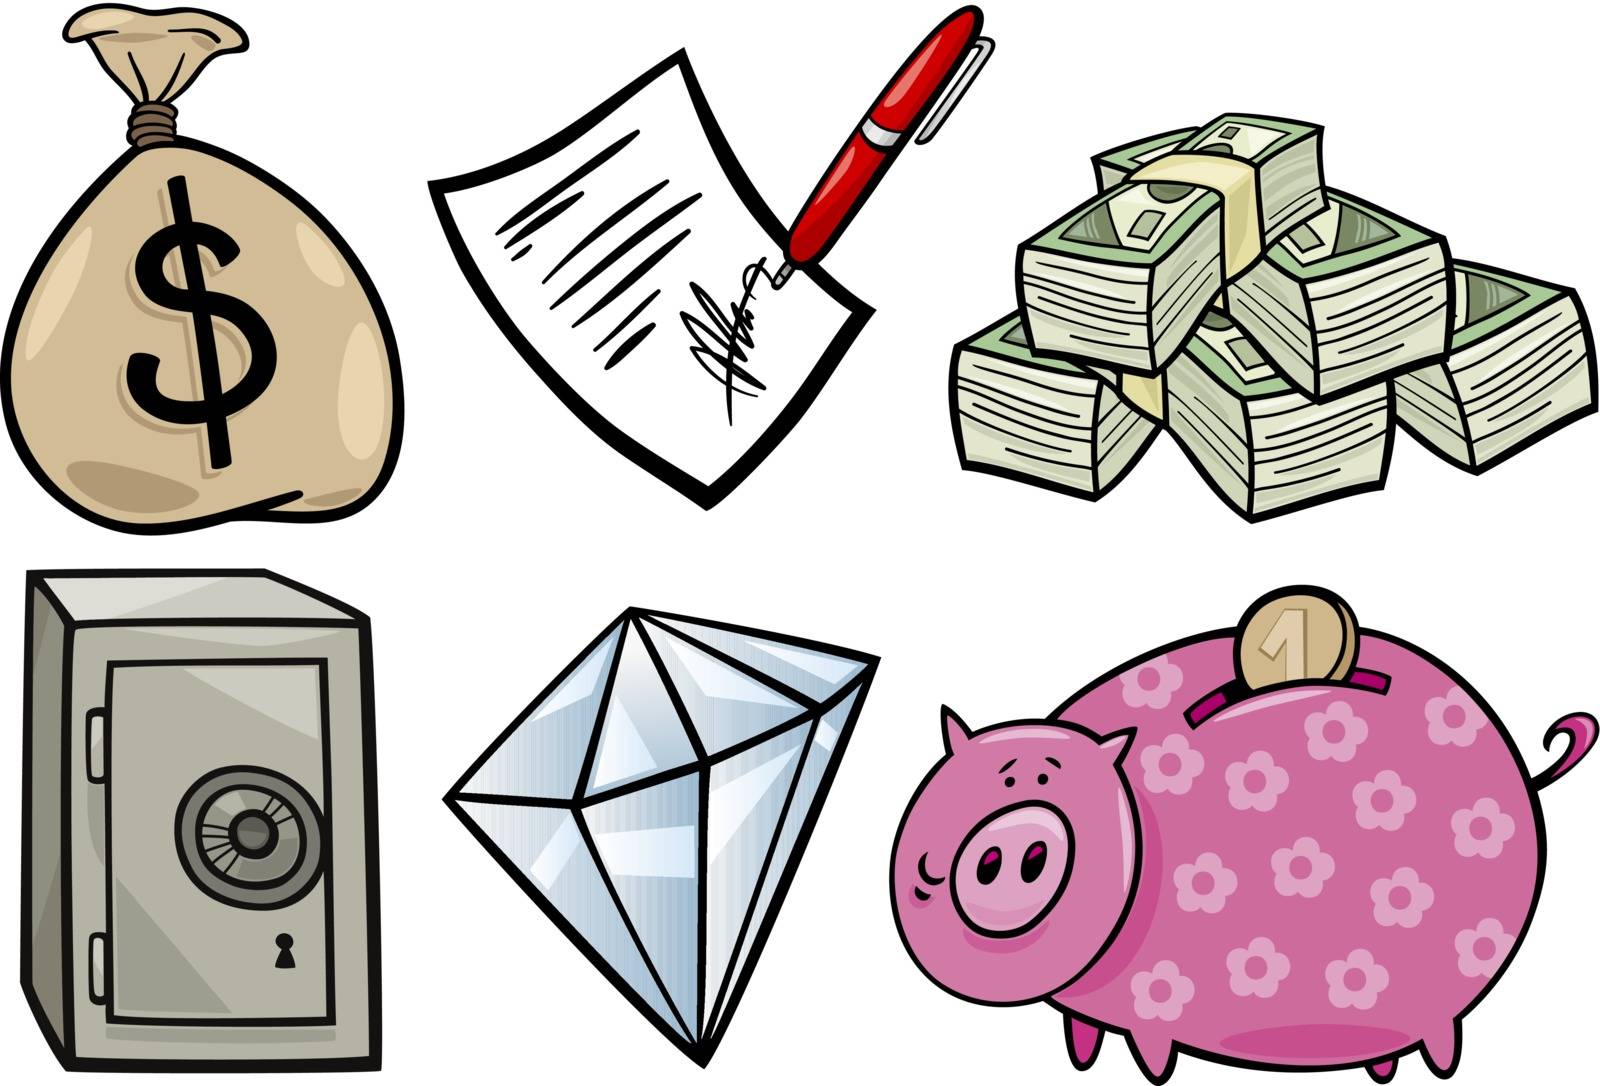 Cartoon Illustration of Business Valuable Objects or Wealth Concepts Objects Clip Art Set